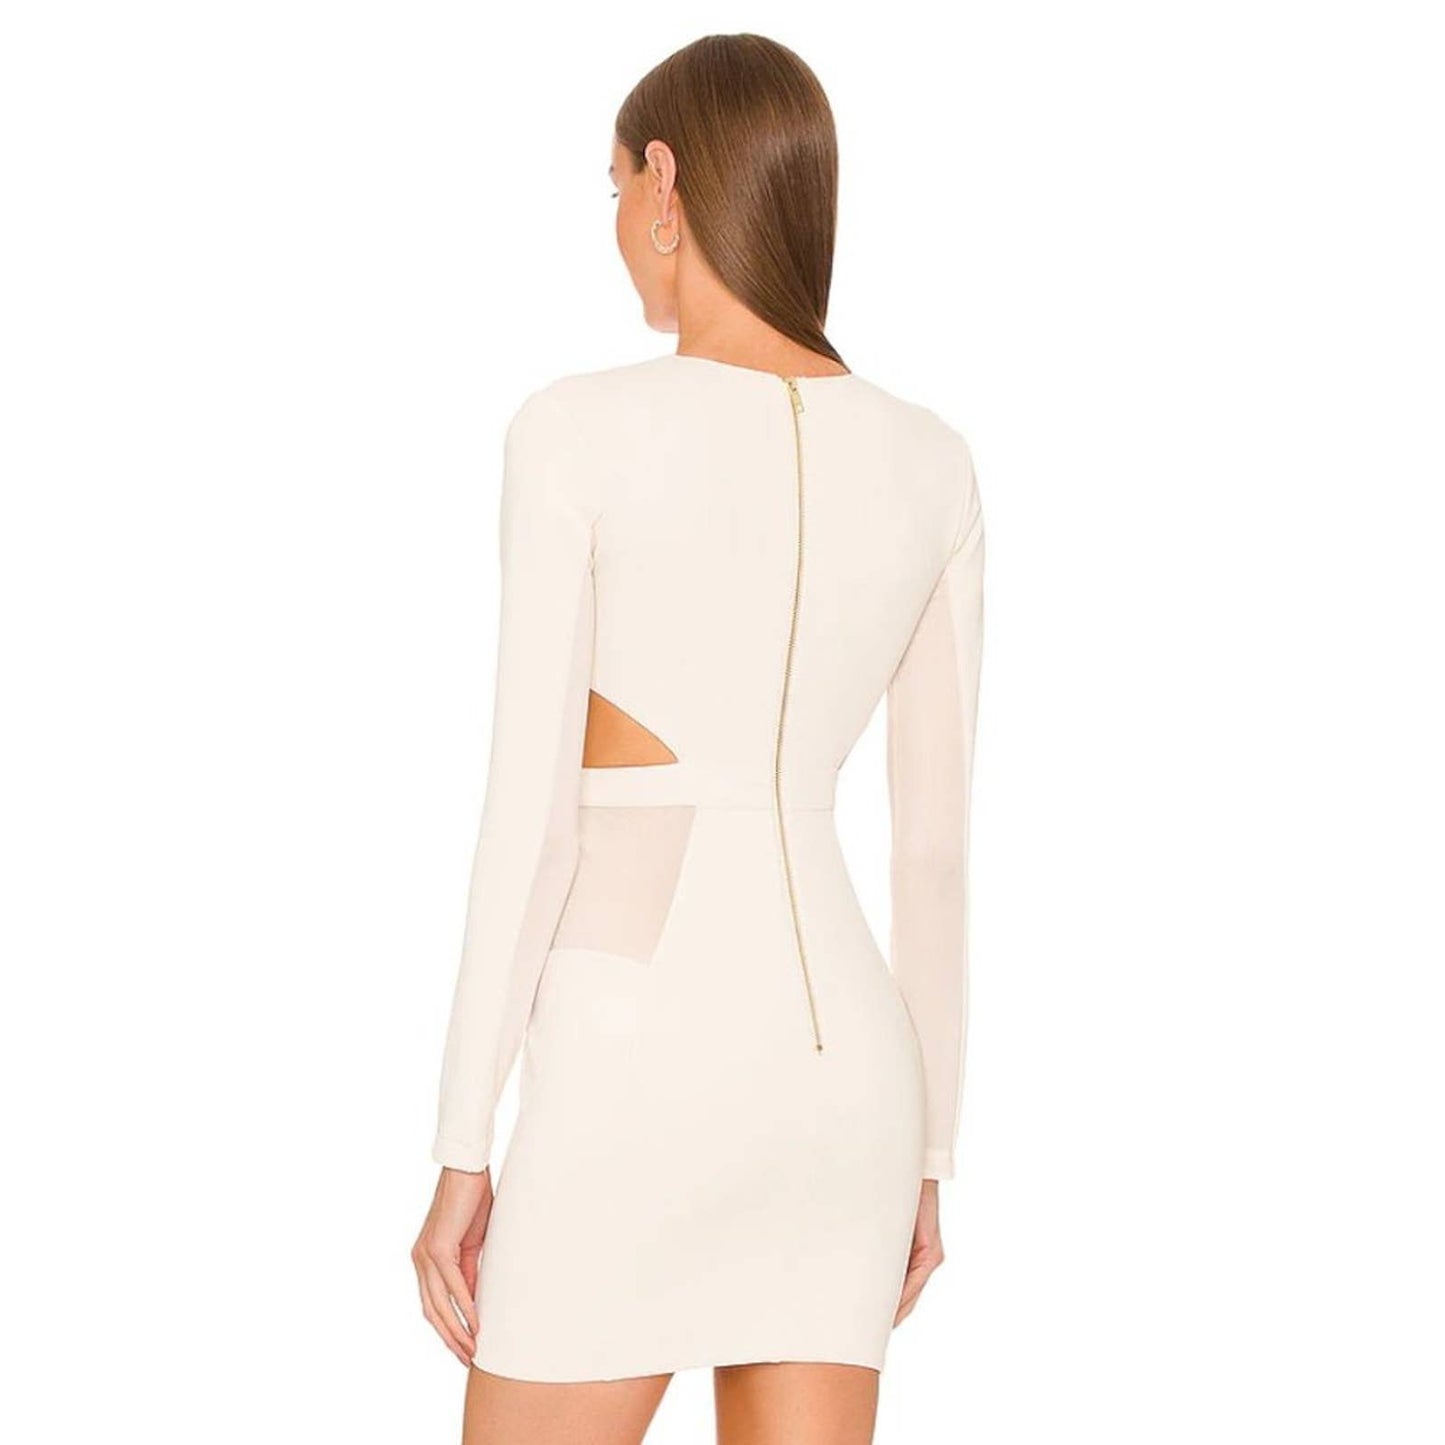 Michael Costello Elise Mini Dress in Off White NWOT Size Small